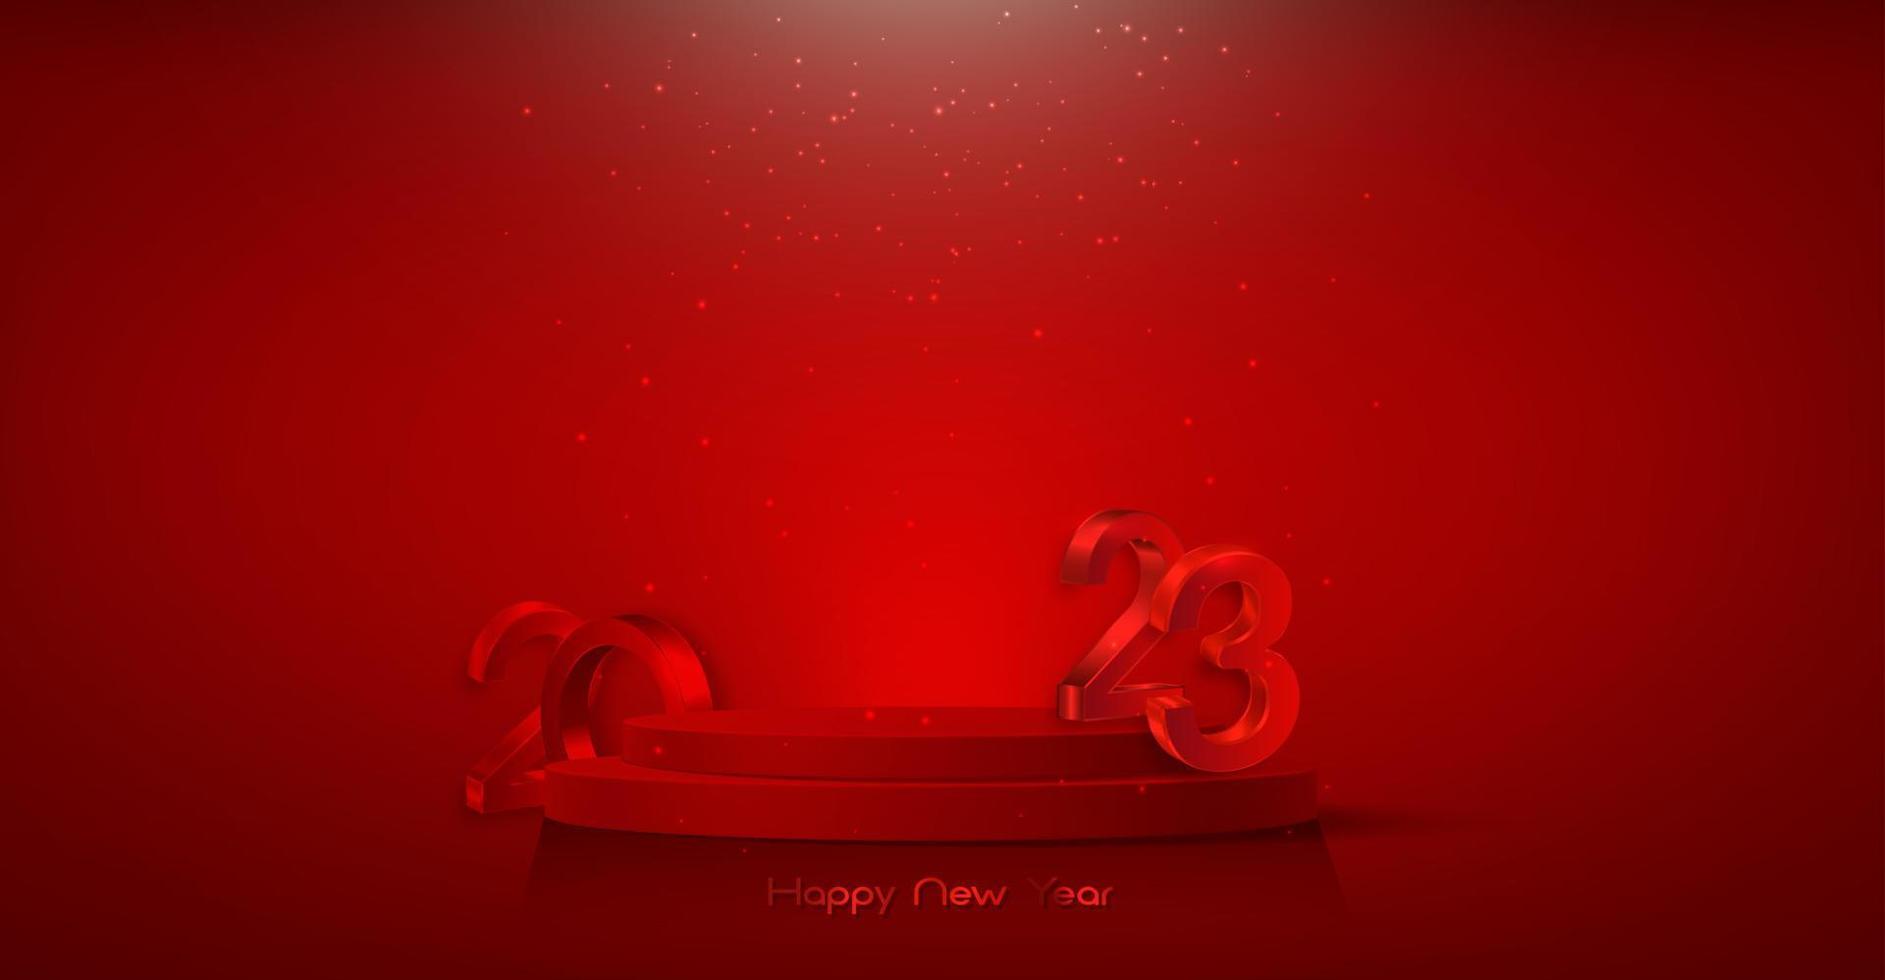 3D 2023 with podium banner, New Year party, red foil numerals, product display cylindrical shape, festive platform for the holidays. Vector luxury template isolated on red background